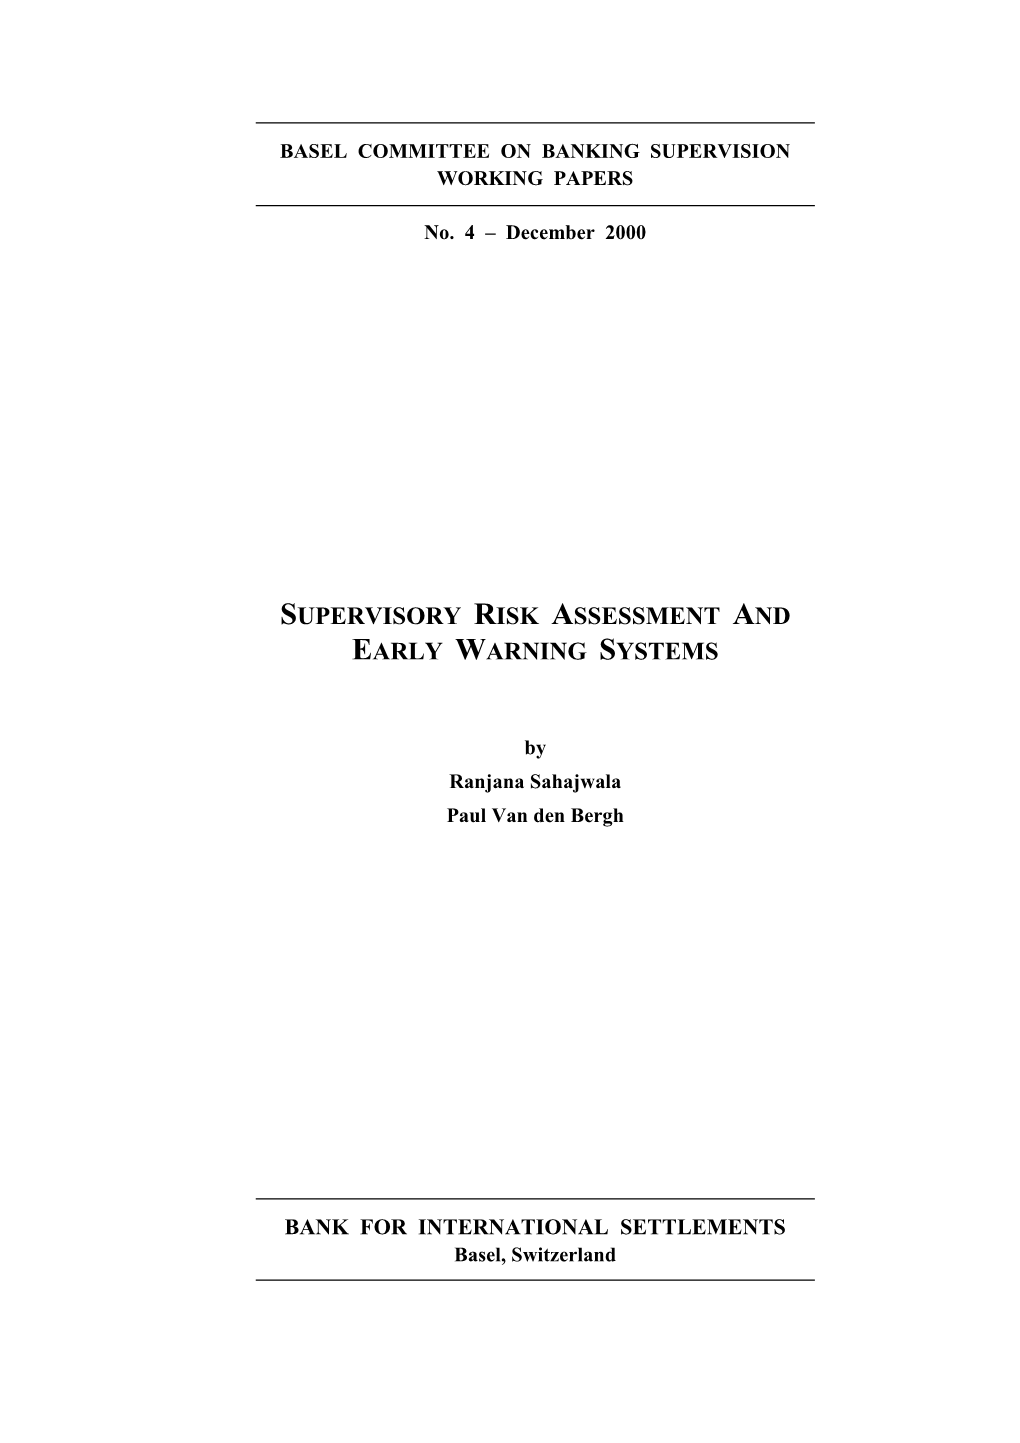 Supervisory Risk Assessment and Early Warning Systems